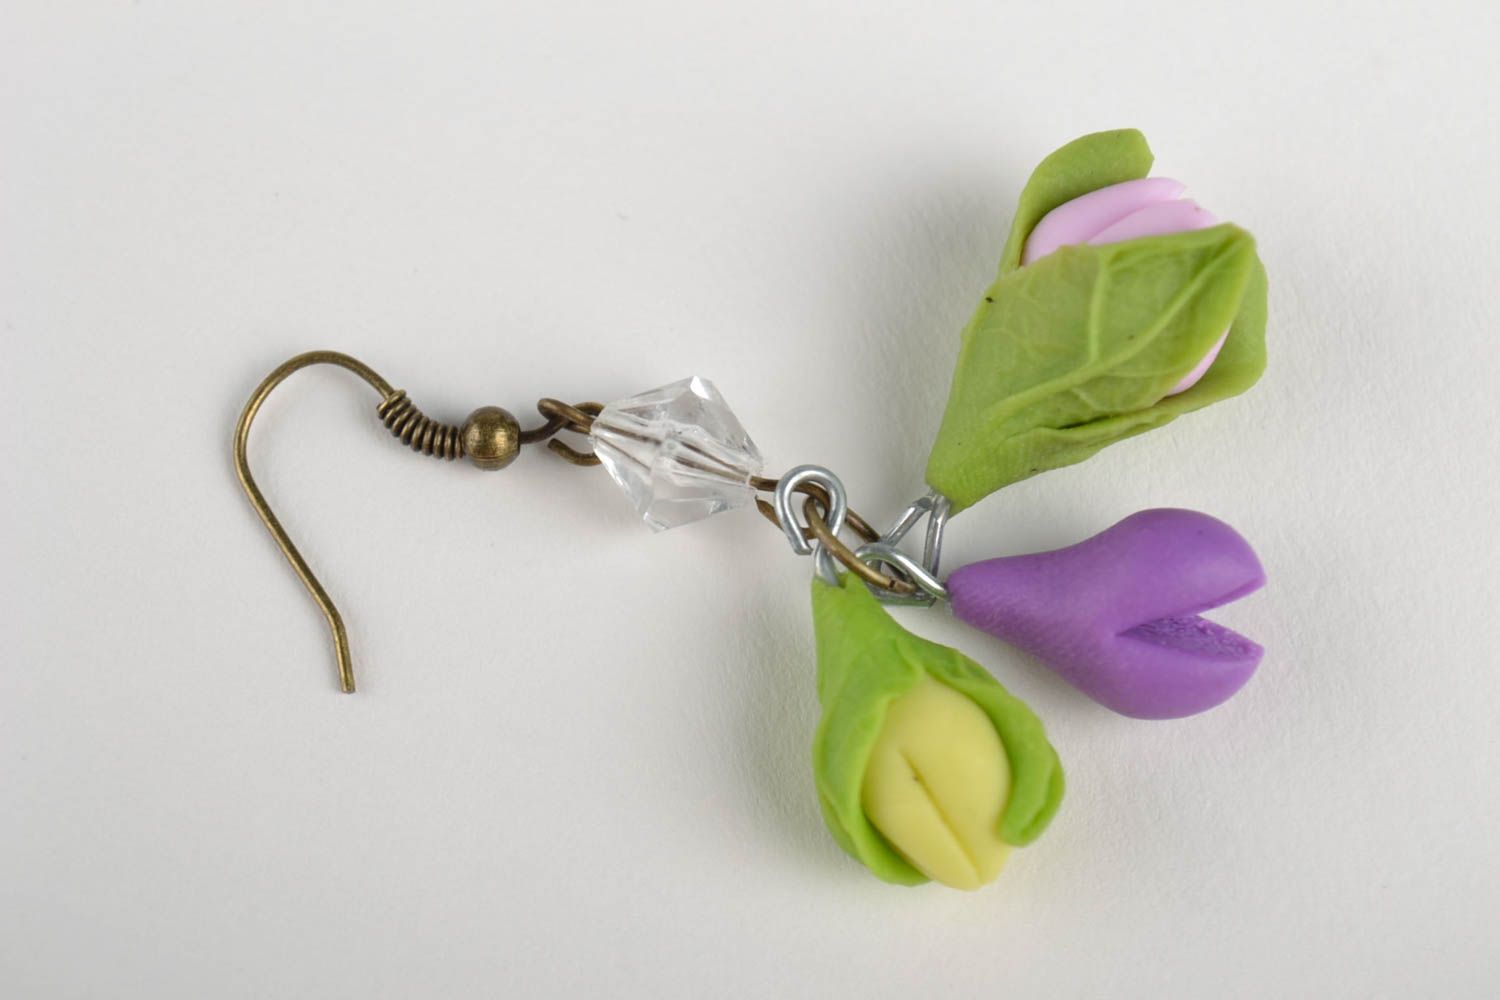 Dangling earrings flower jewelry handmade earrings polymer clay gifts for her photo 3